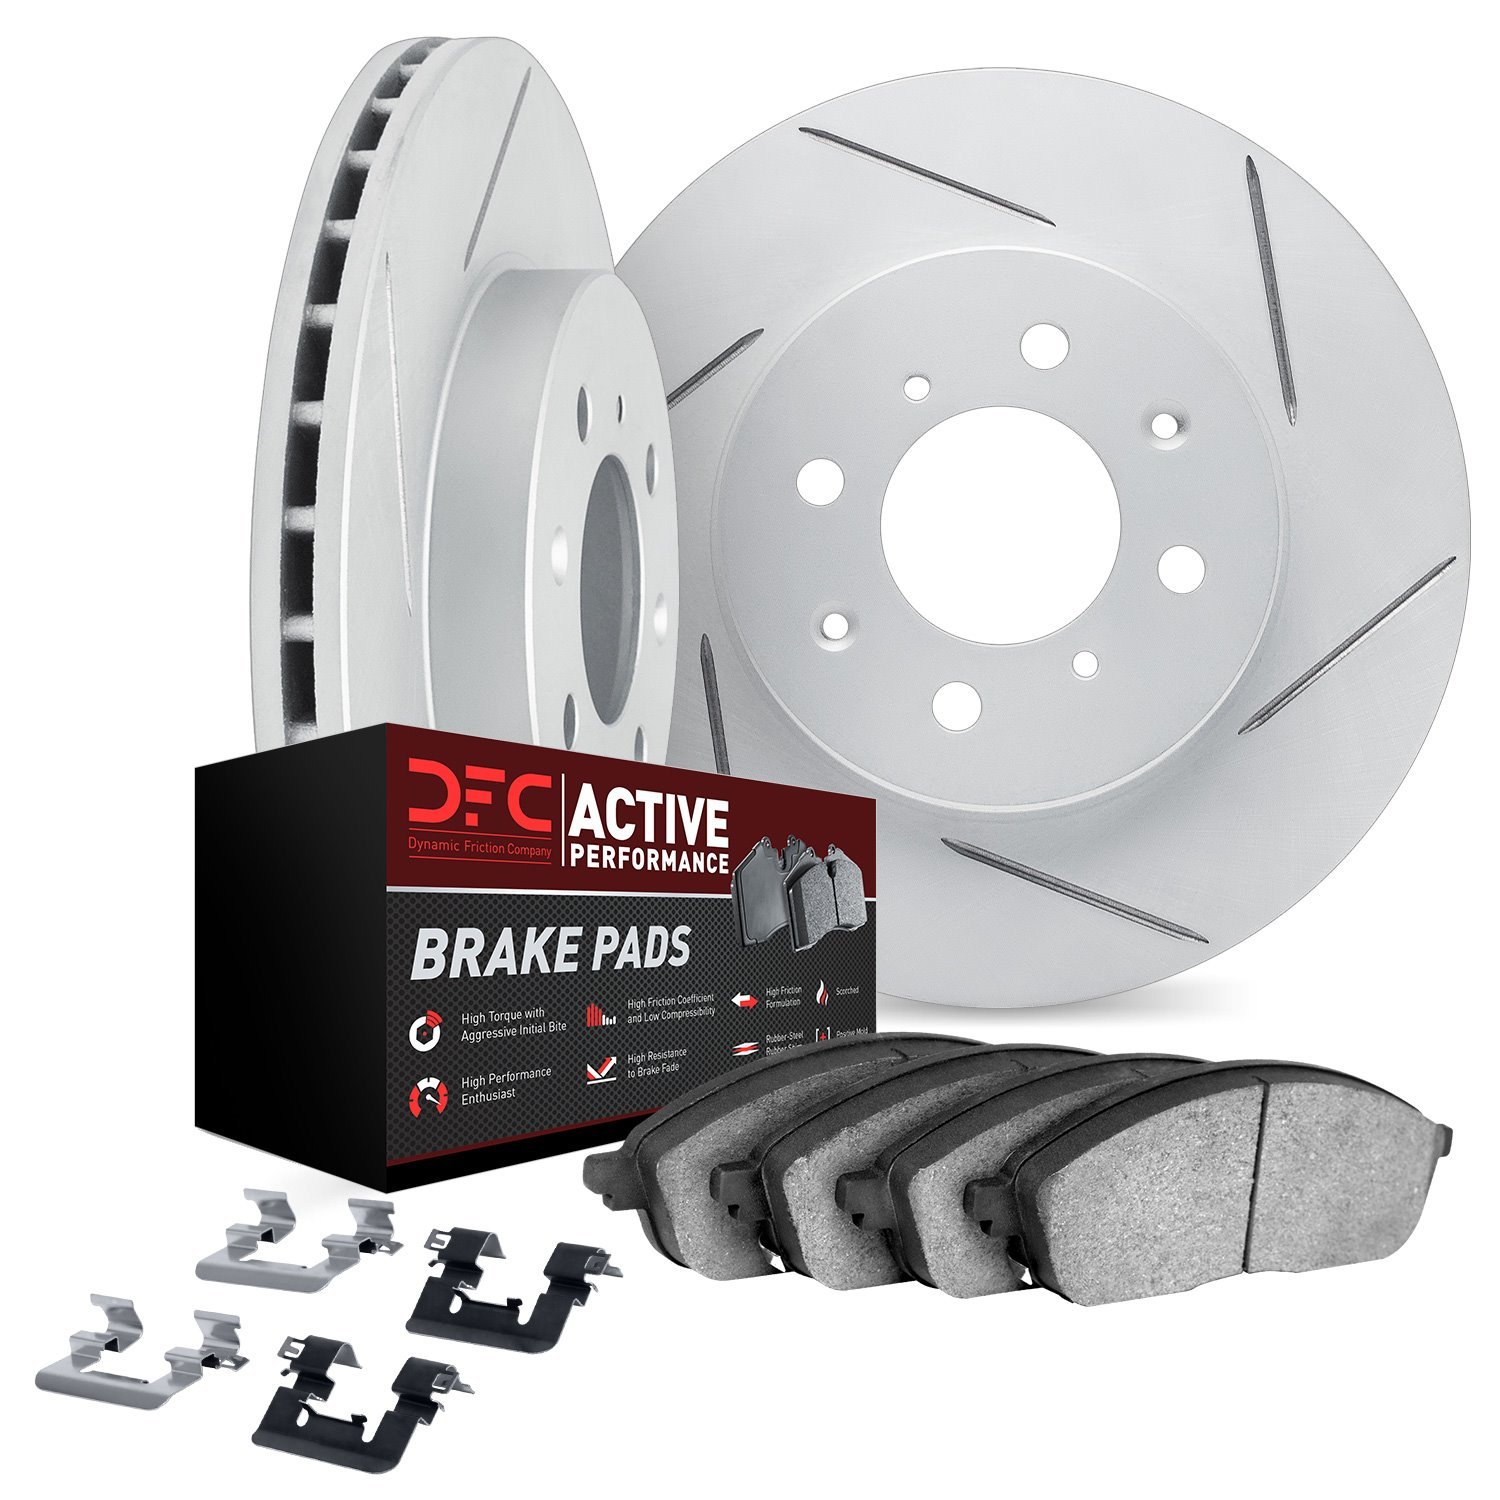 2712-59093 Geoperformance Slotted Brake Rotors with Active Performance Pads Kits & Hardware, 2015-2020 Acura/Honda, Position: Fr